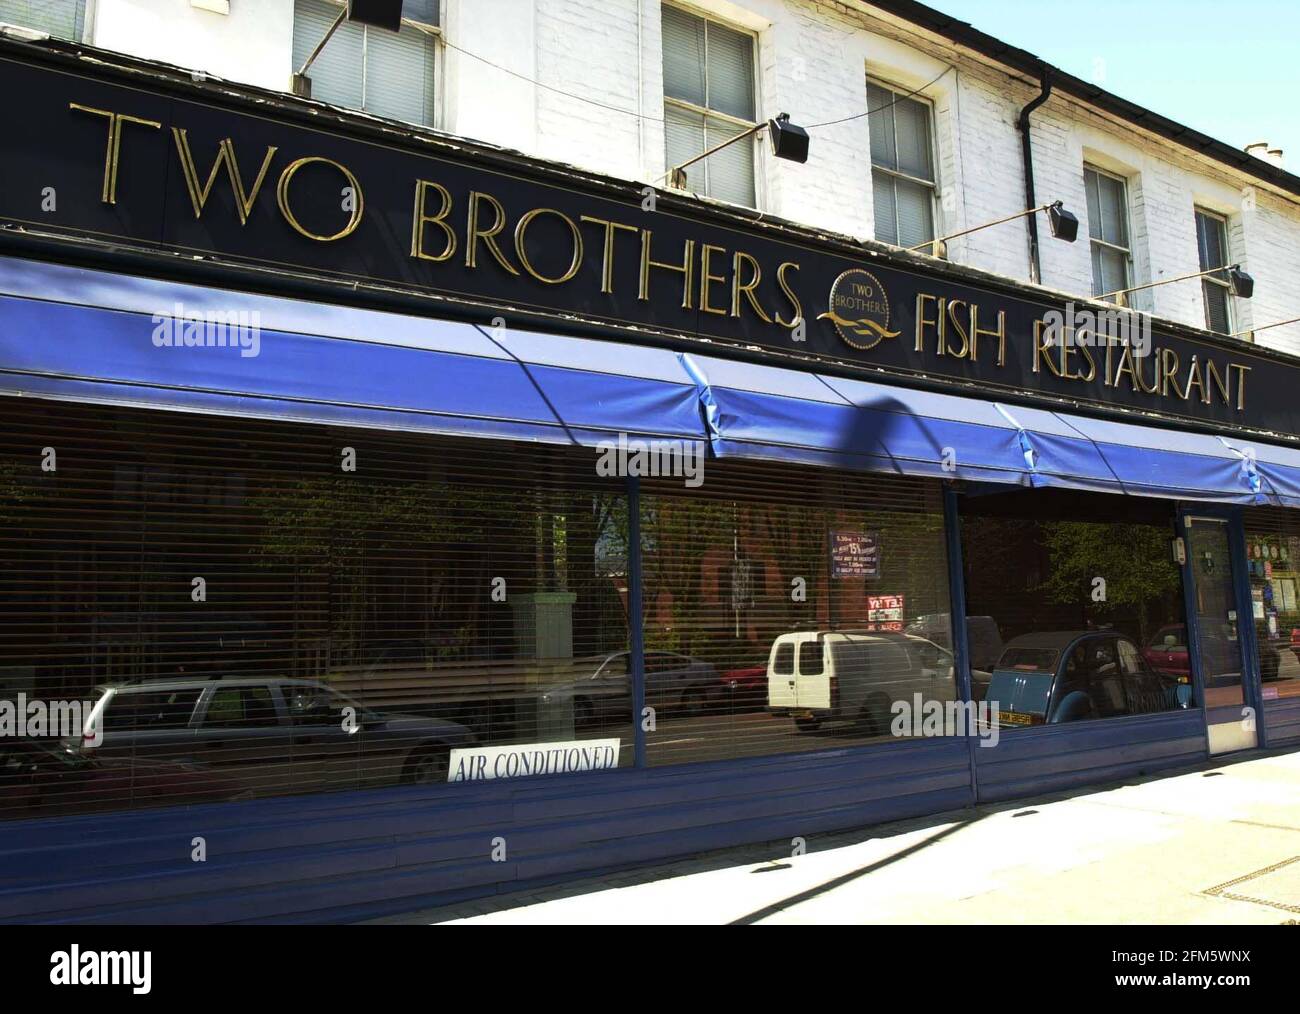 TWO BROTHERS FISH RESTAURANT FINCHLEY, NORTH LONDON Stock Photo